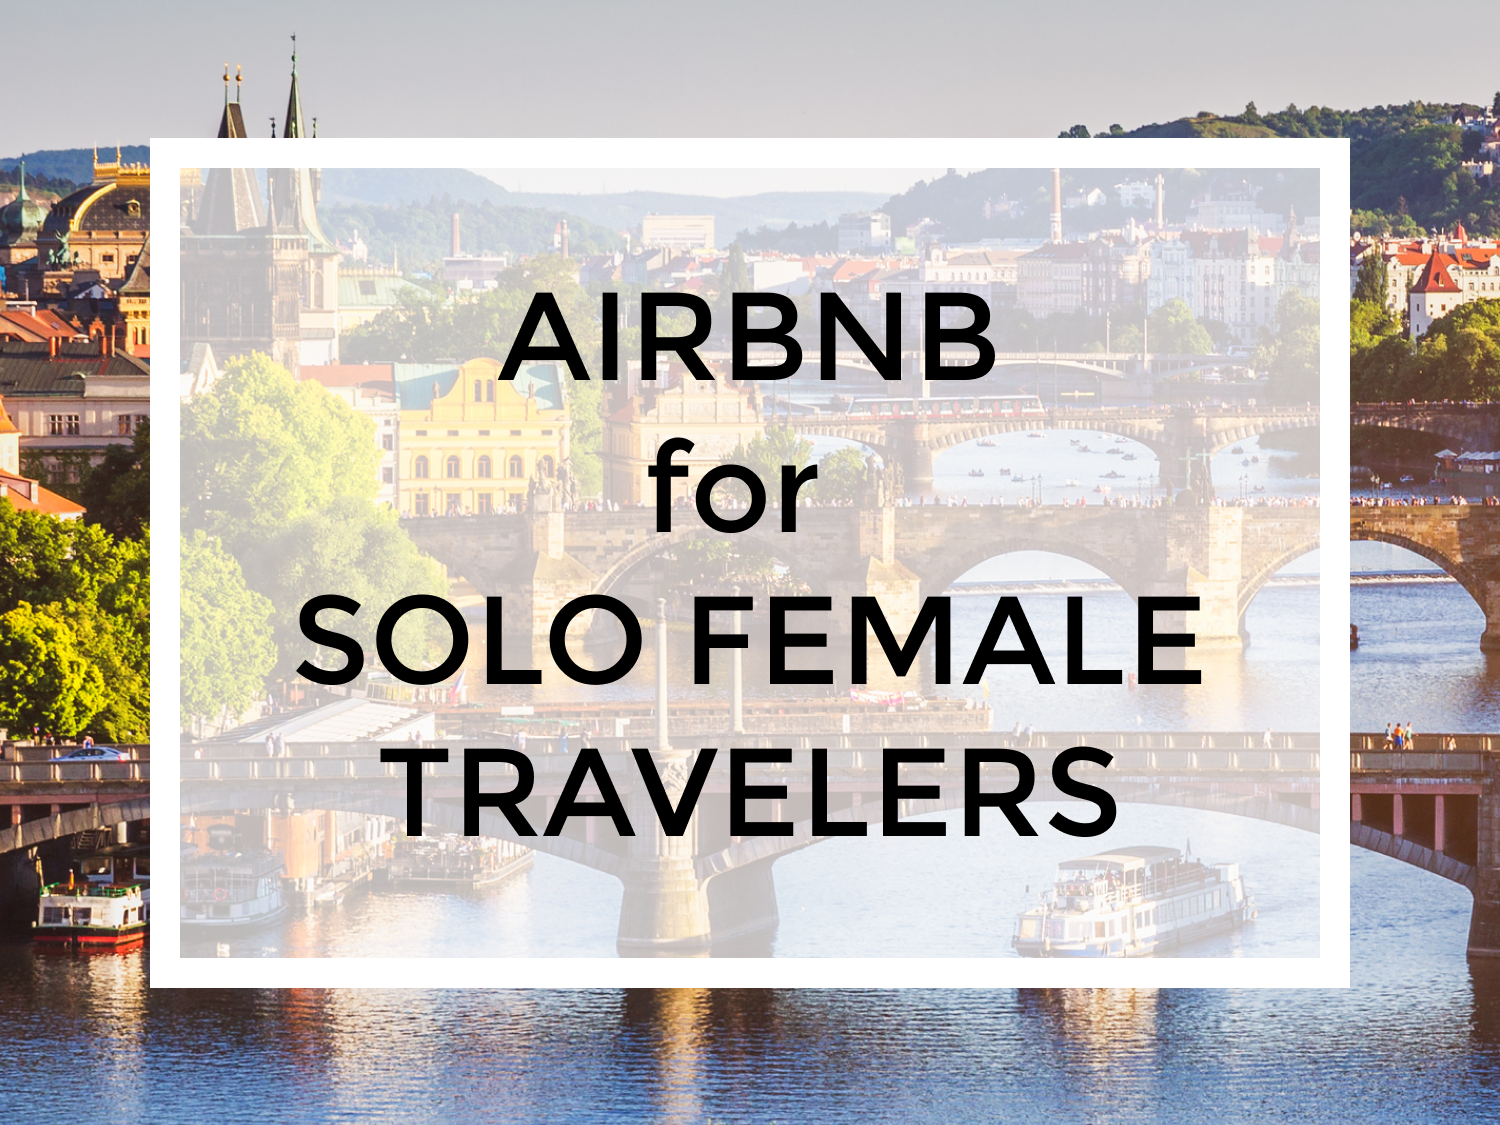 10 Tips for Choosing an Airbnb as a Solo Female Traveler